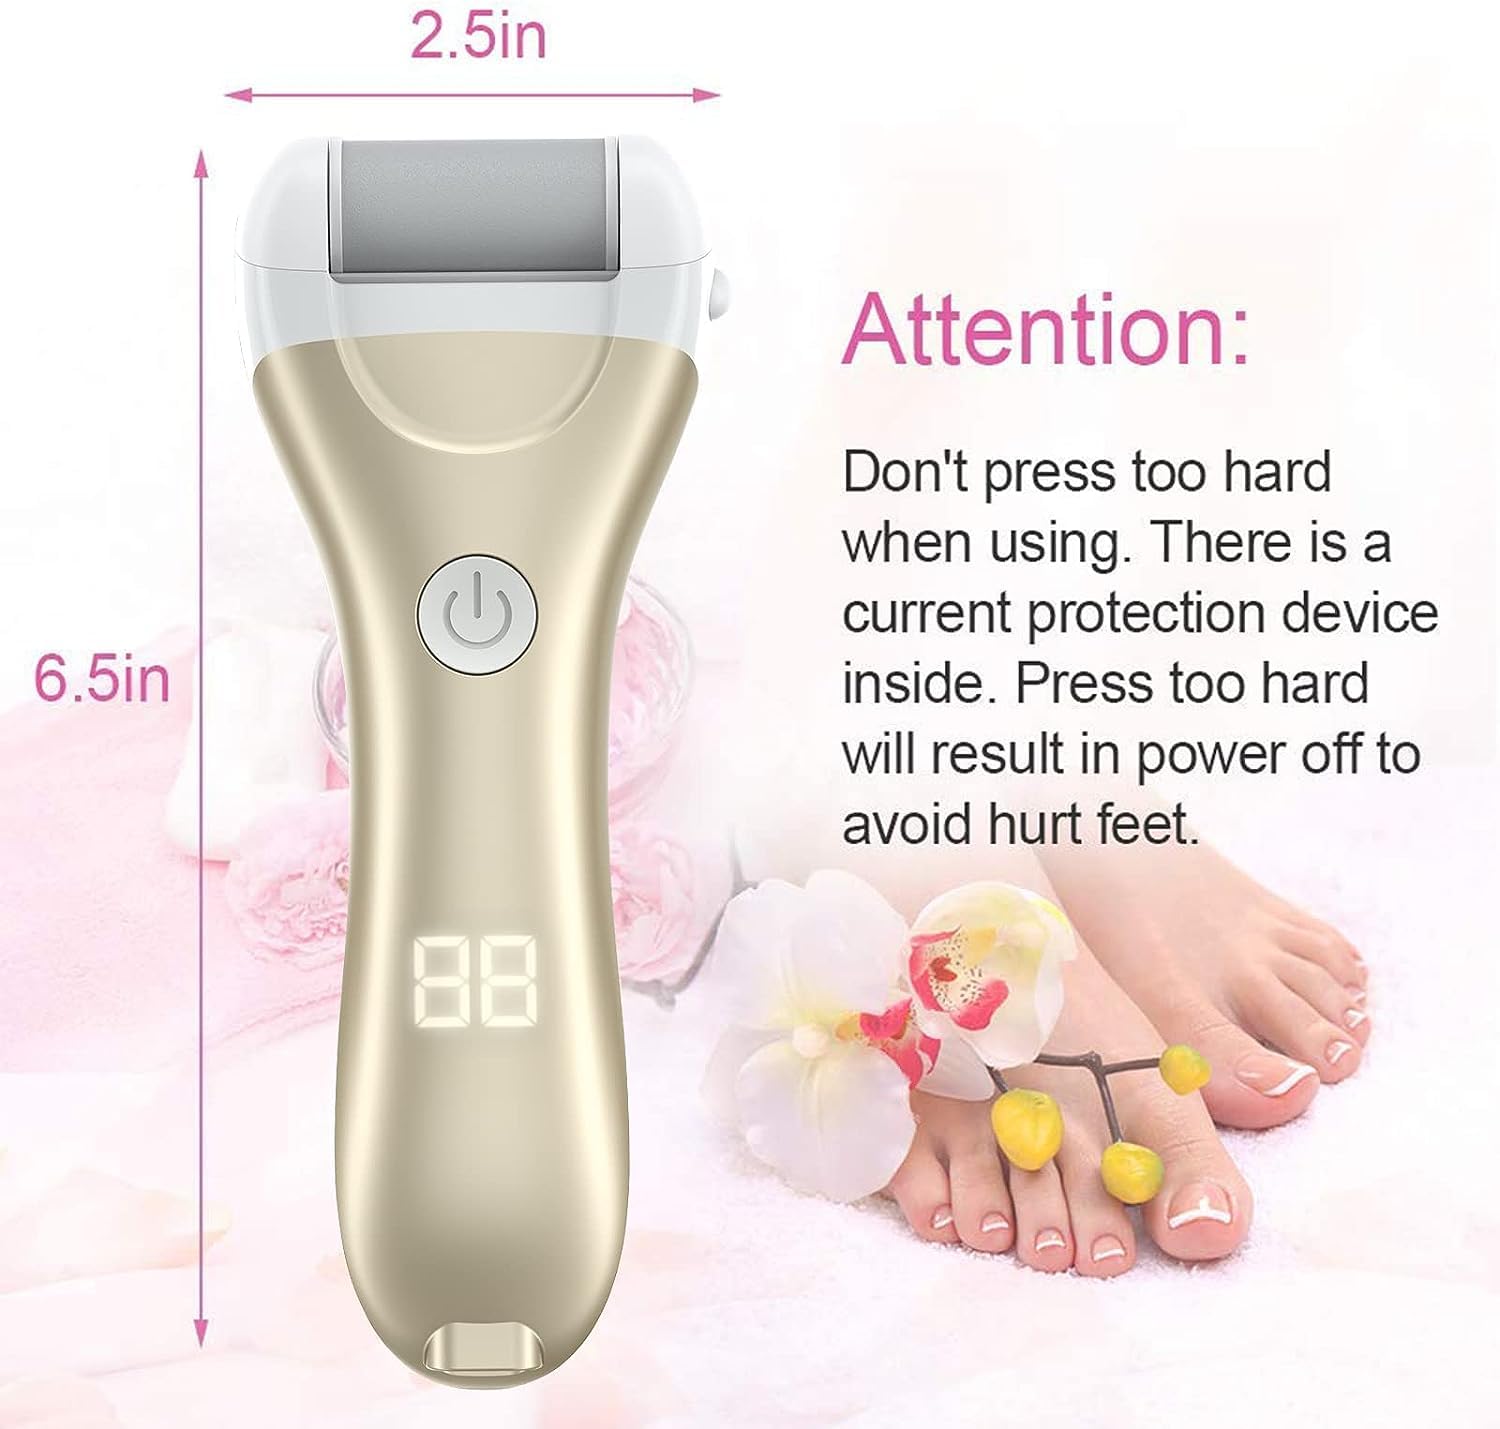 Foot Scrubber Electric Callus Remover, 18-in-1 Rechargeable Electric Foot File Hard Skin Remover IPX7 Waterproof Pedicure Tool with 3 Roller Heads and 2 Speeds for Dead Skin Remover Cracked Heels